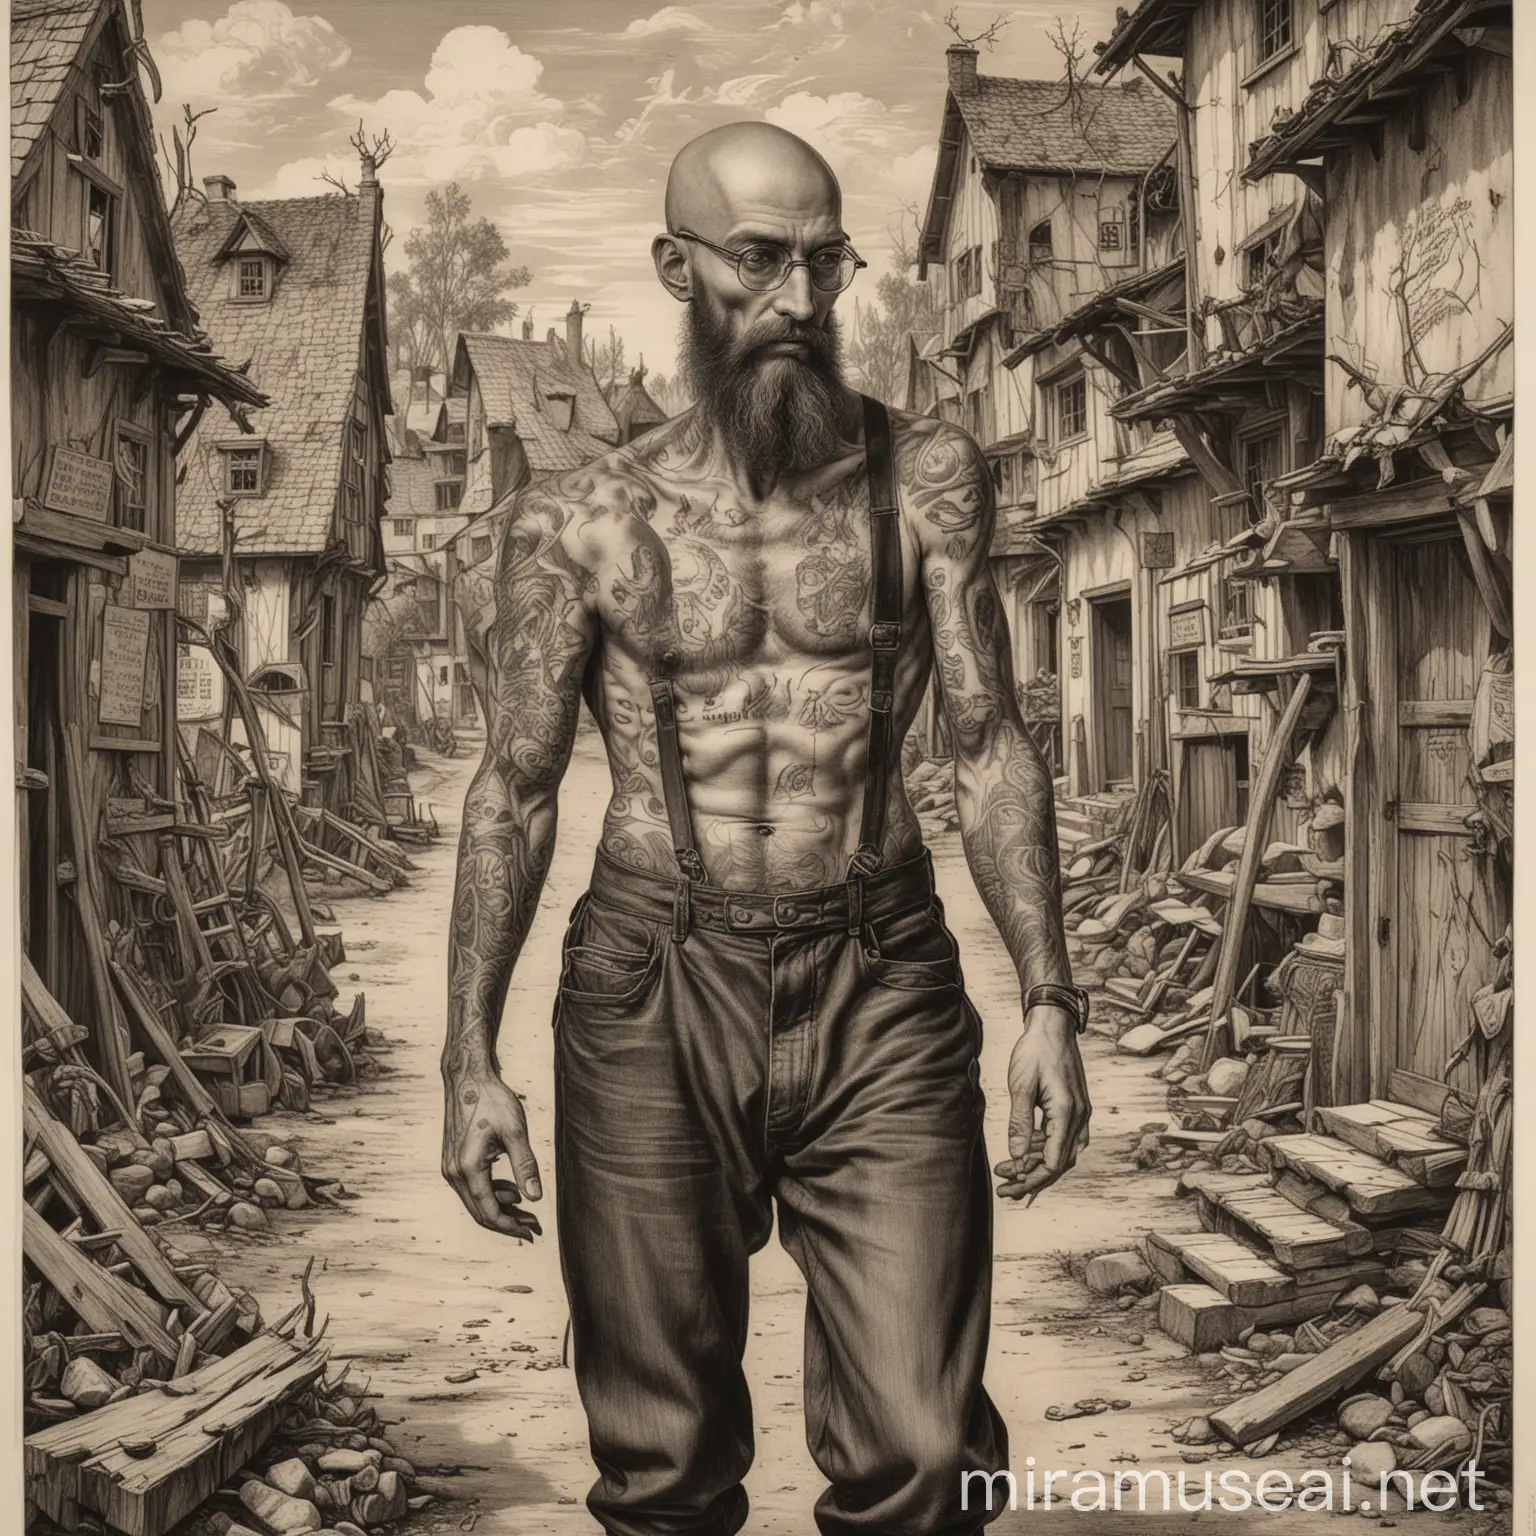 Albrecht Dührer style lithograph, etching, engraving, ink print, of a tall, skinny man with tattoos and glasses, a shaved head and a thick beard, wearing suspenders, careening through a small village, destroying all in his path, and causing fiery damage and chaotic disruption throughout